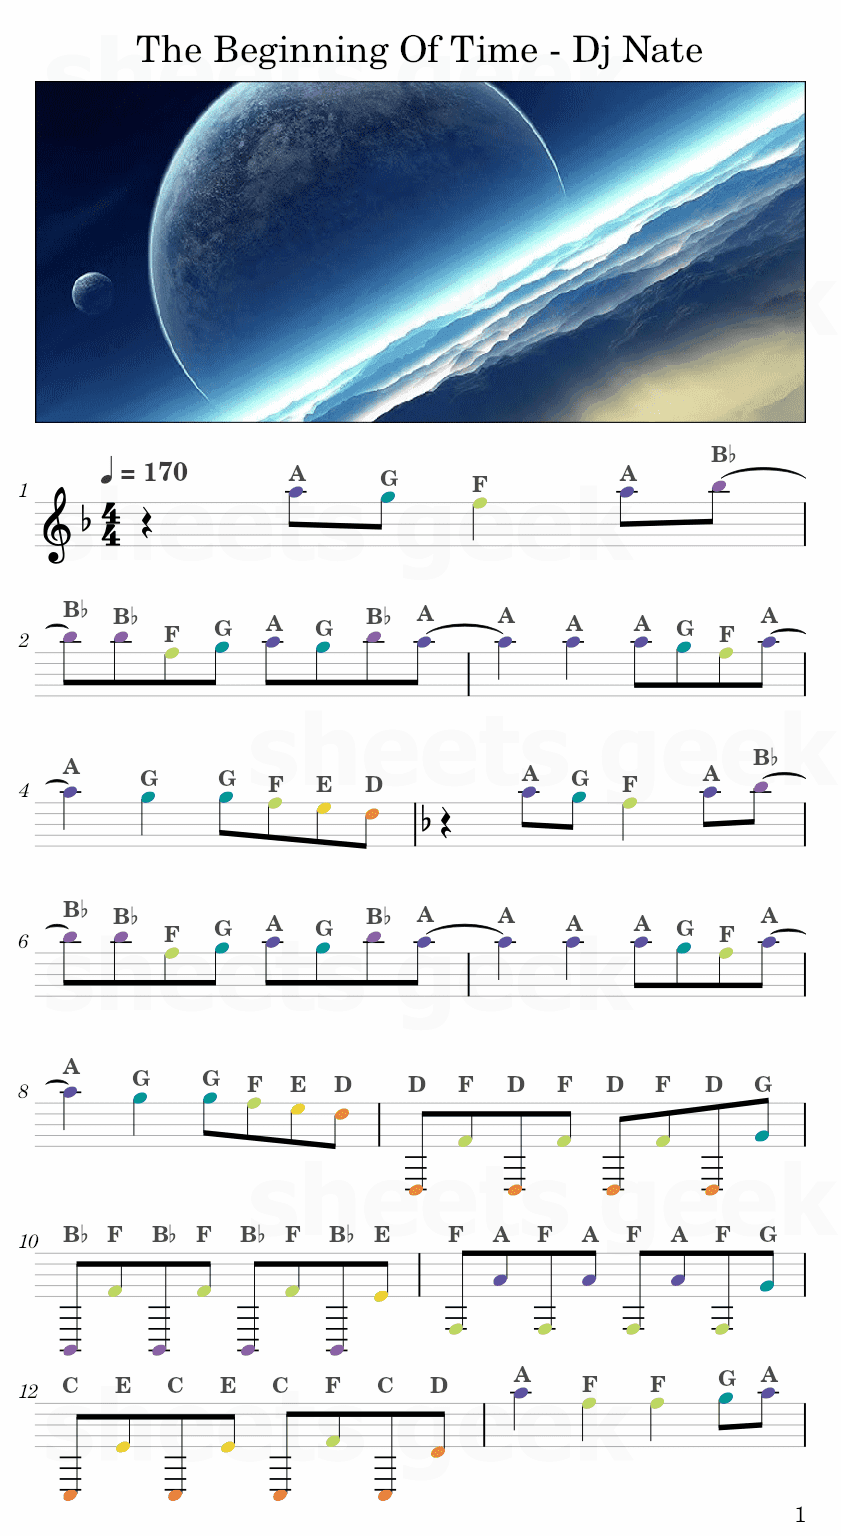 The Beginning Of Time - Dj Nate Easy Sheet Music Free for piano, keyboard, flute, violin, sax, cello page 1